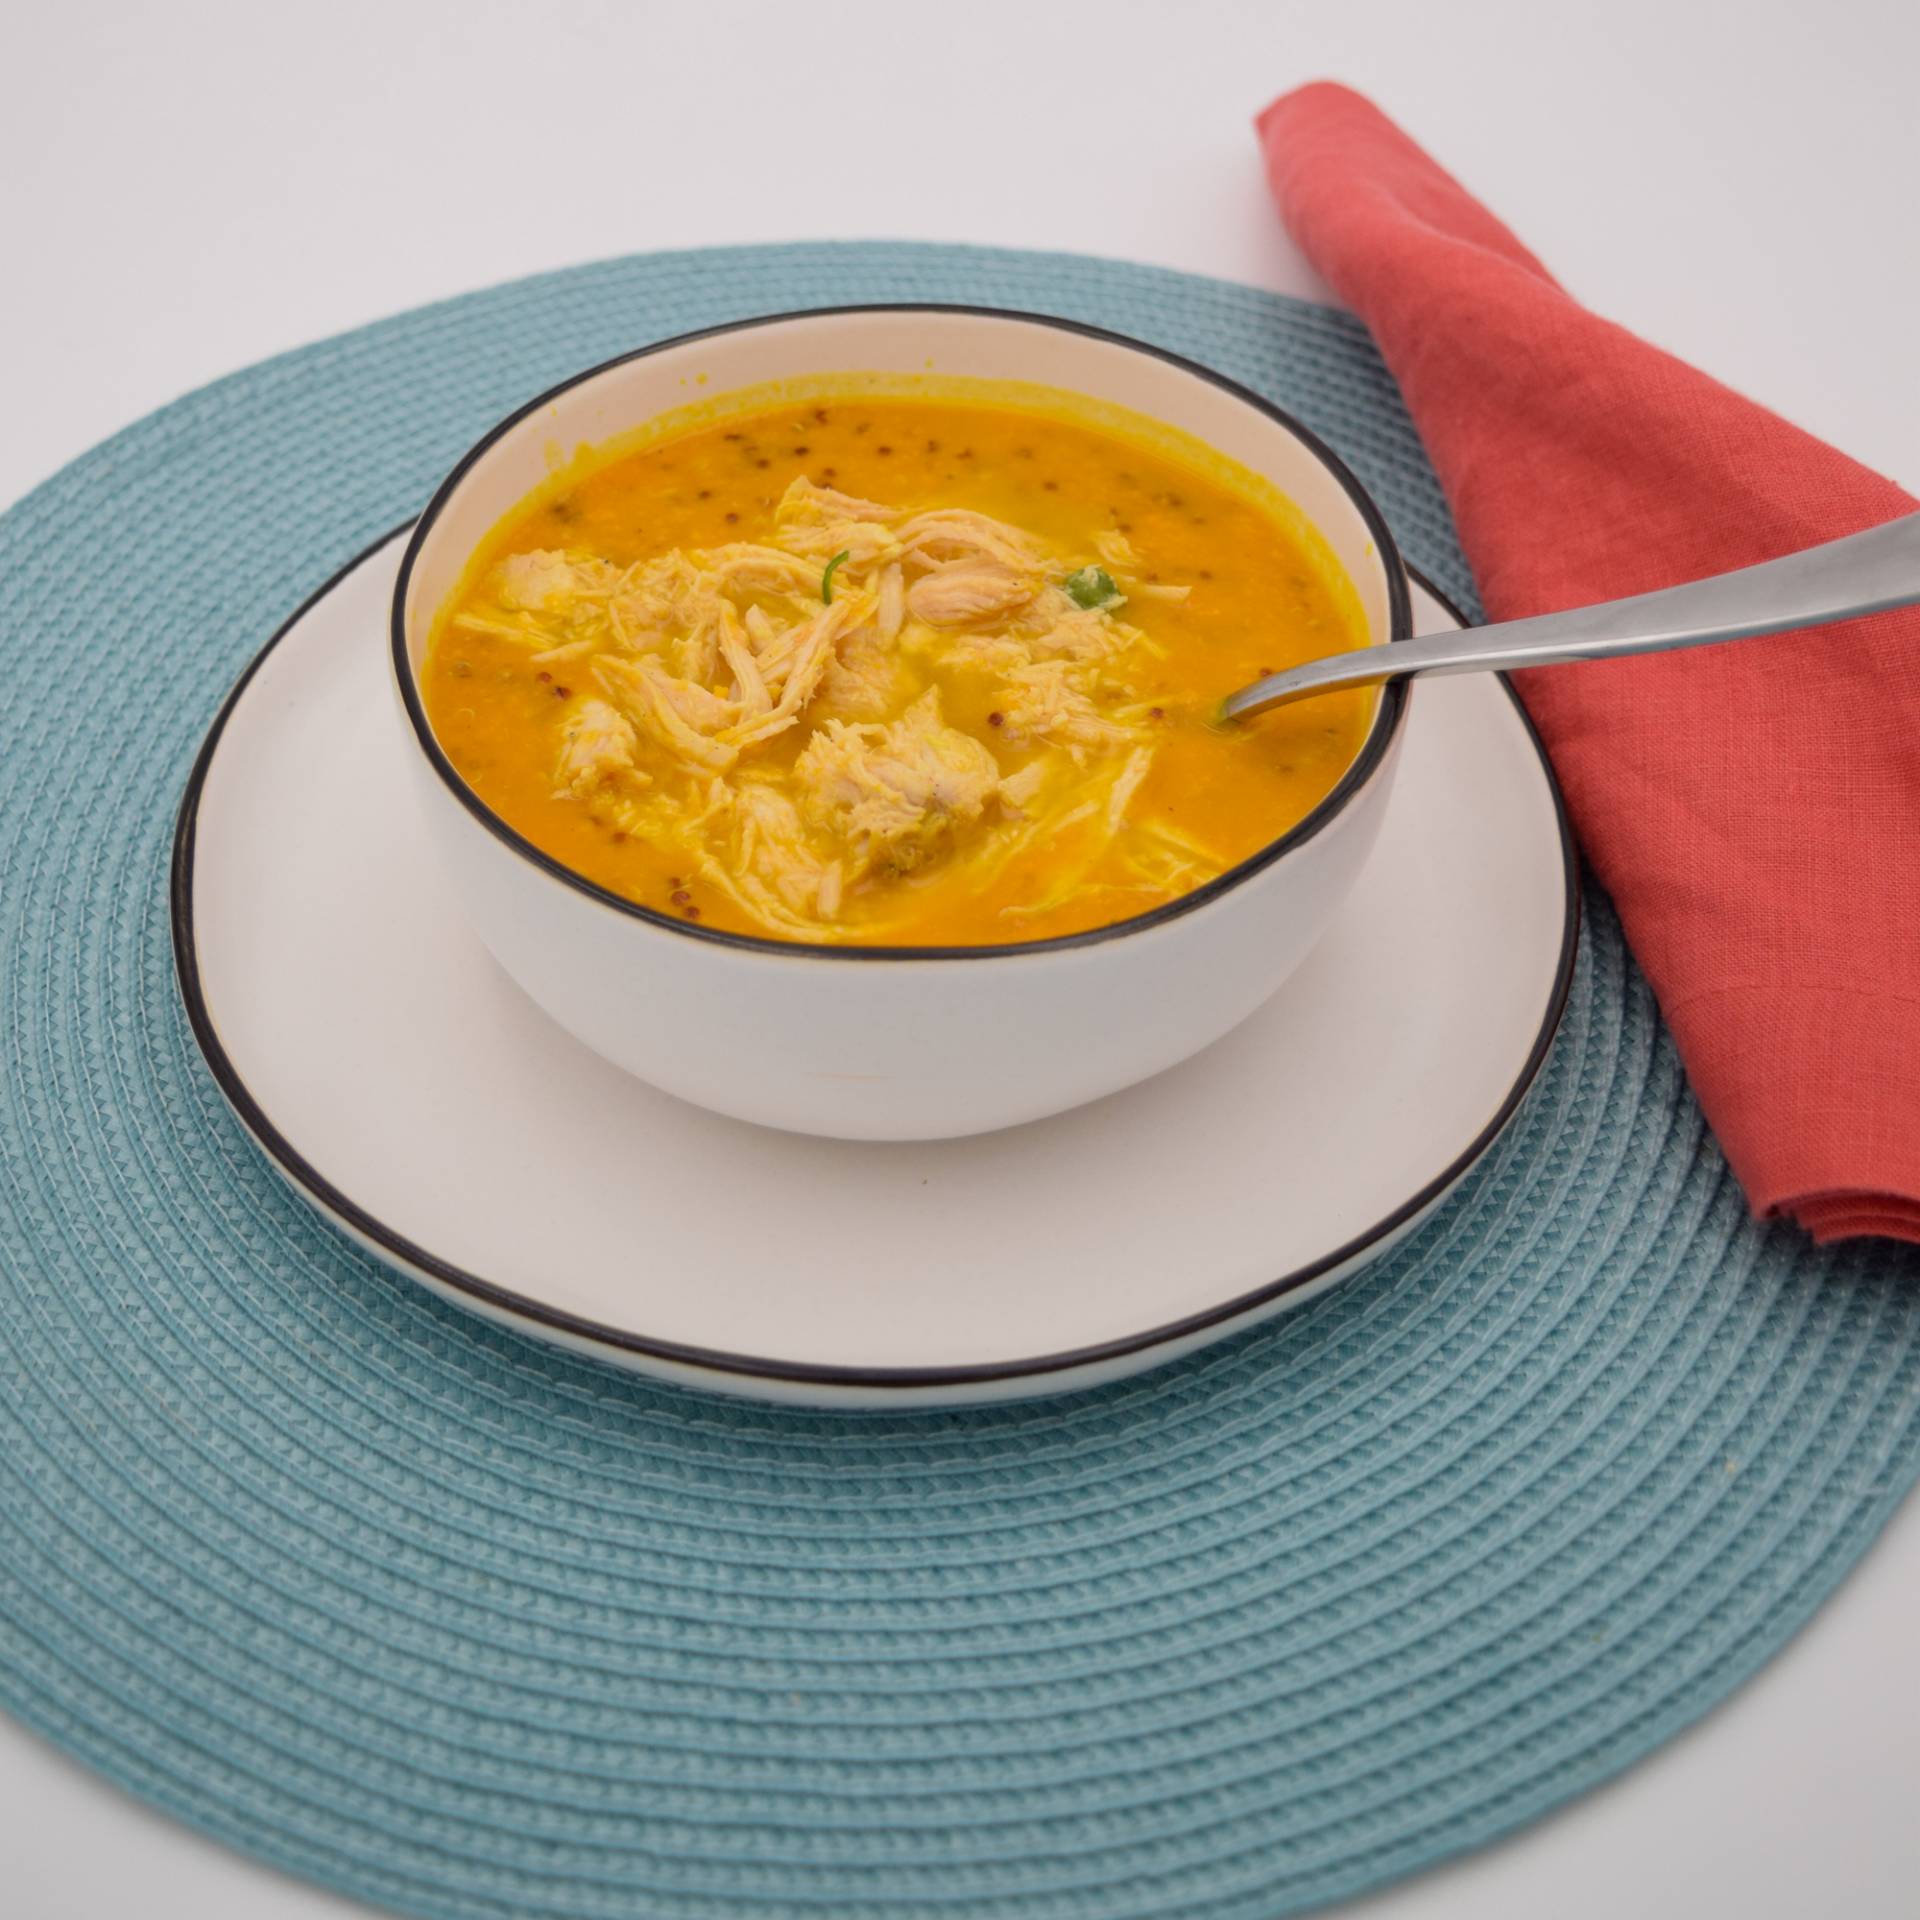 Butternut squash soup with quinoa and shredded chicken